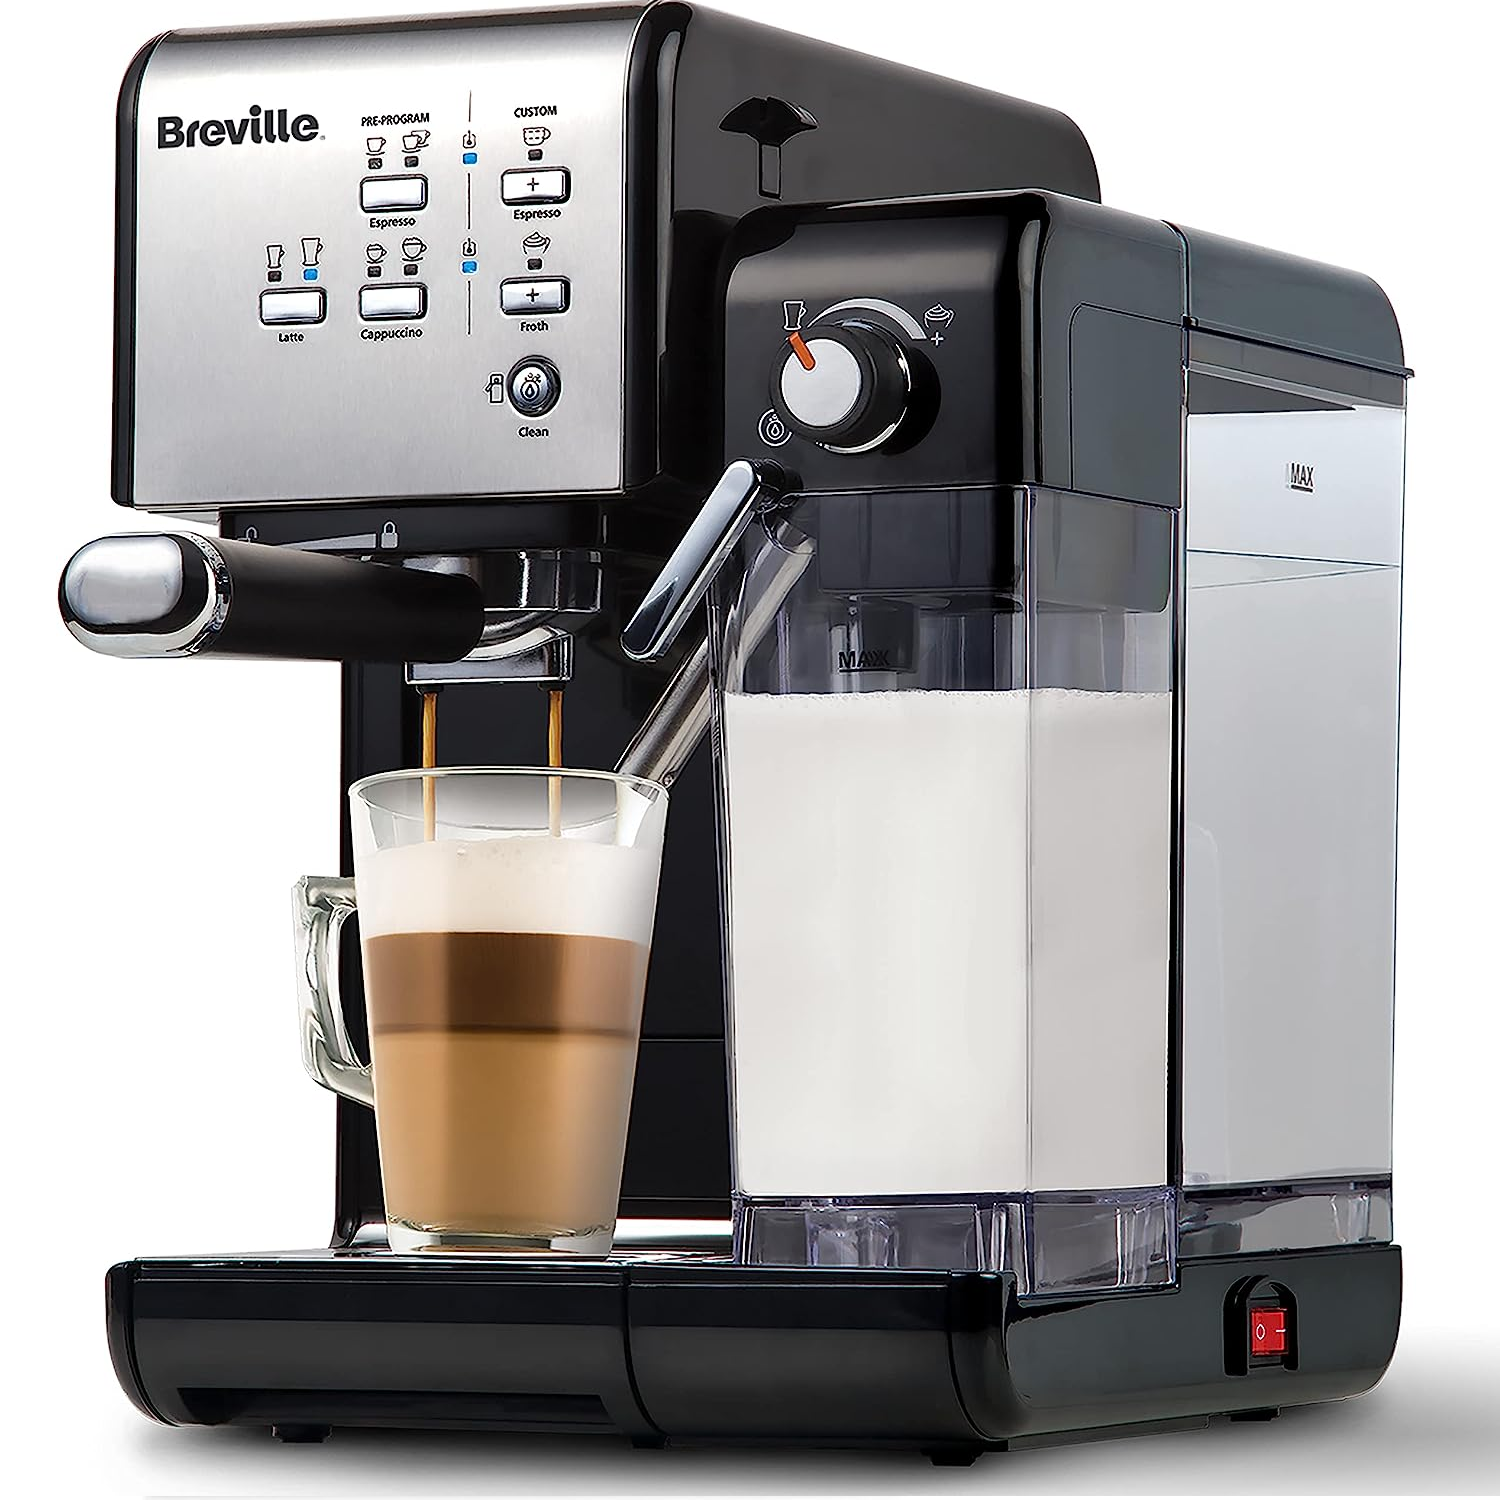 BREVILLE One-Touch VCF107 Coffee Machine – Black and Chrome